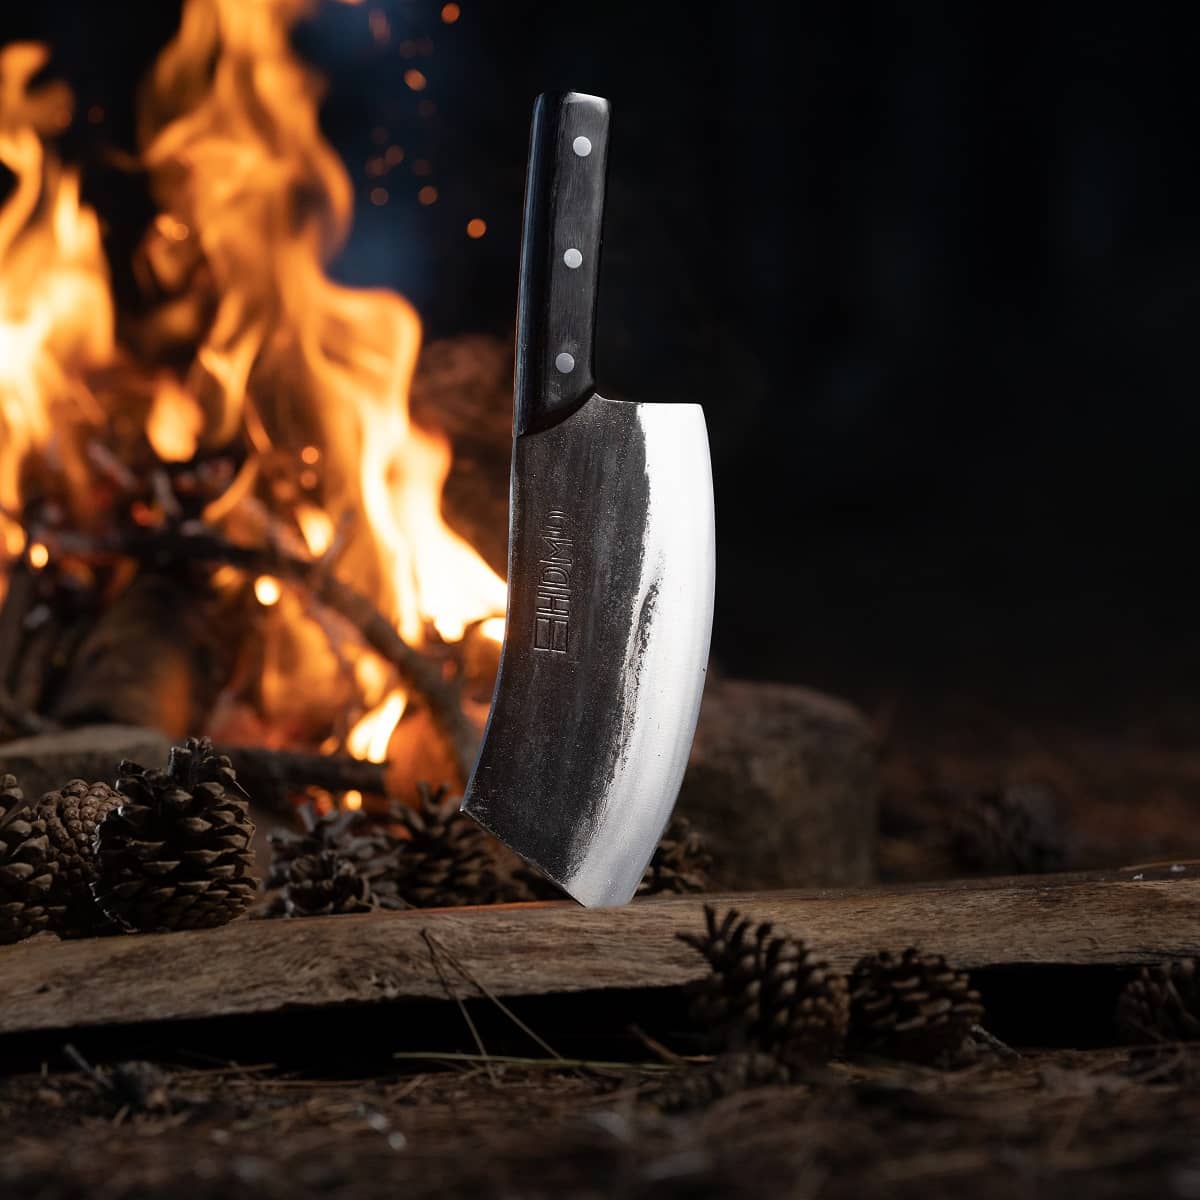 Hand Forged Chef Knife – HDMD Knives